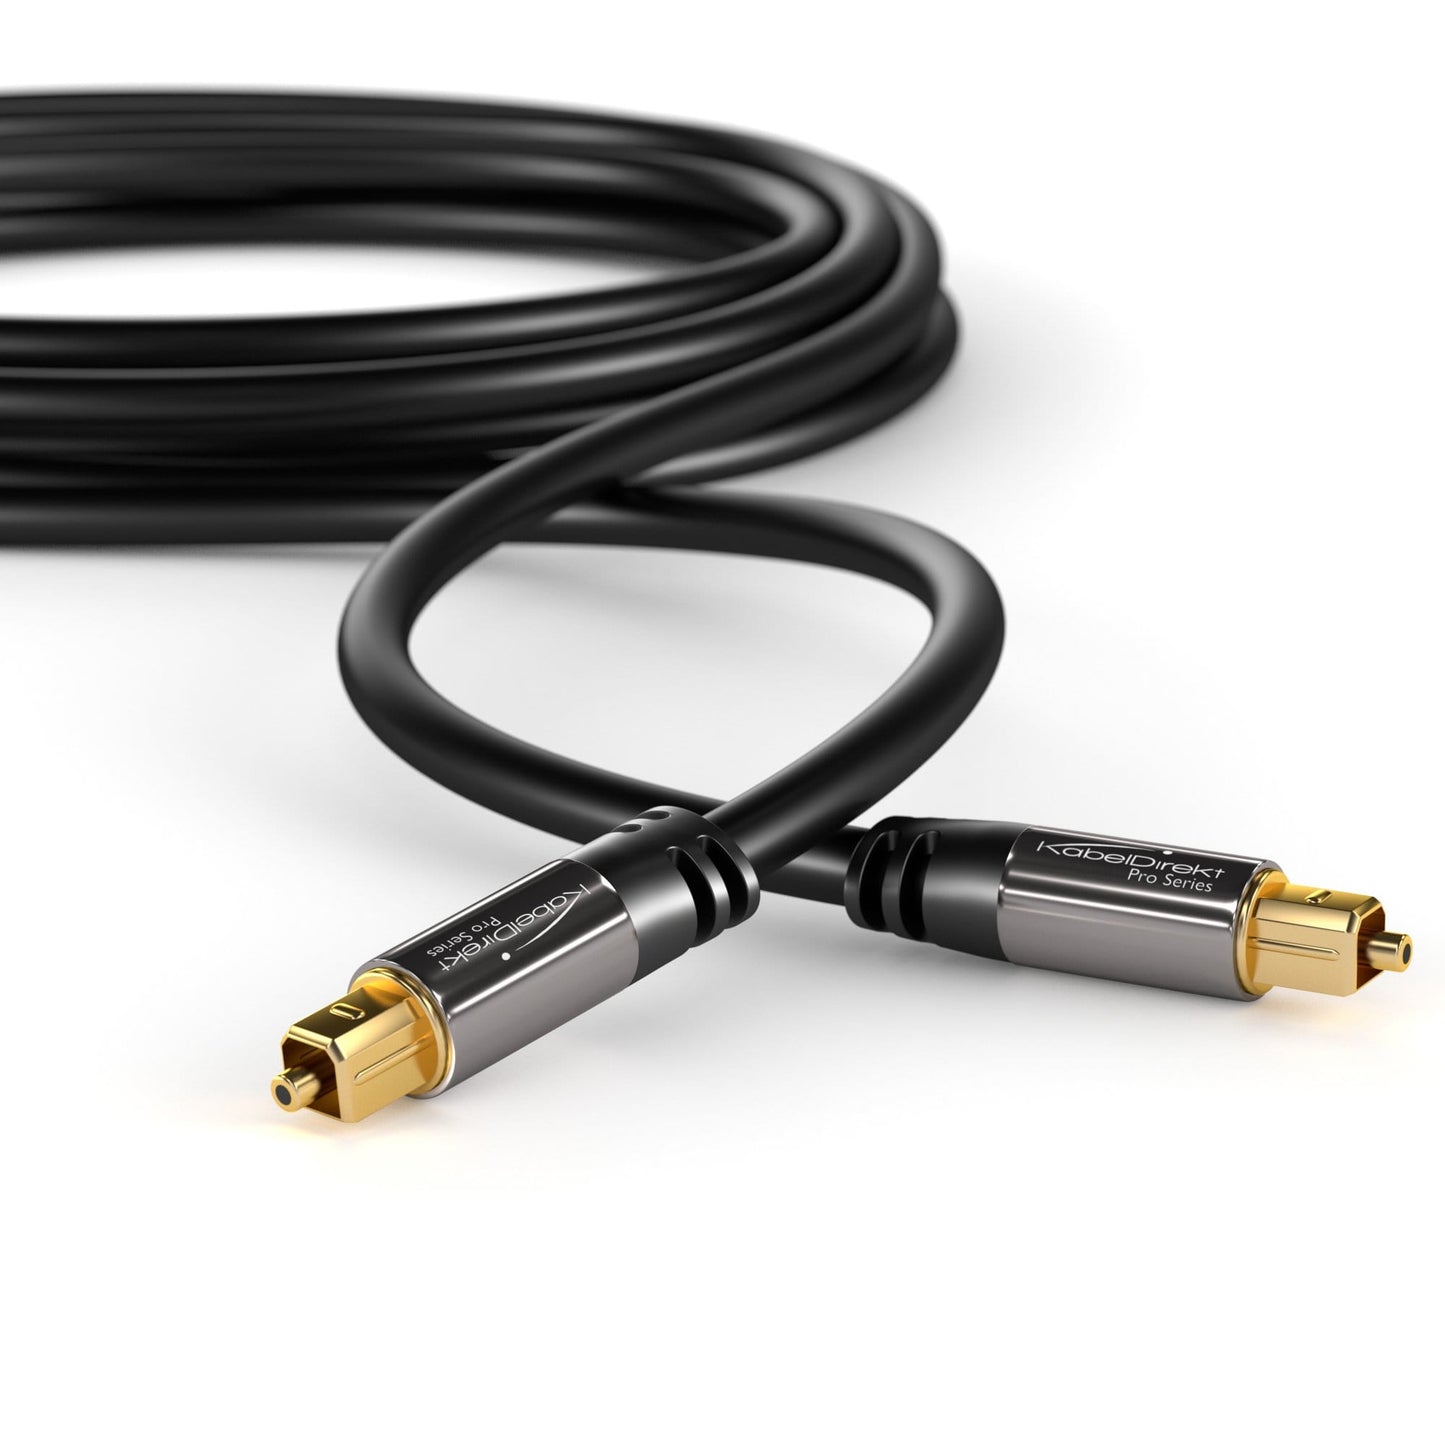 Toslink cable - optical digital cable, audio cable